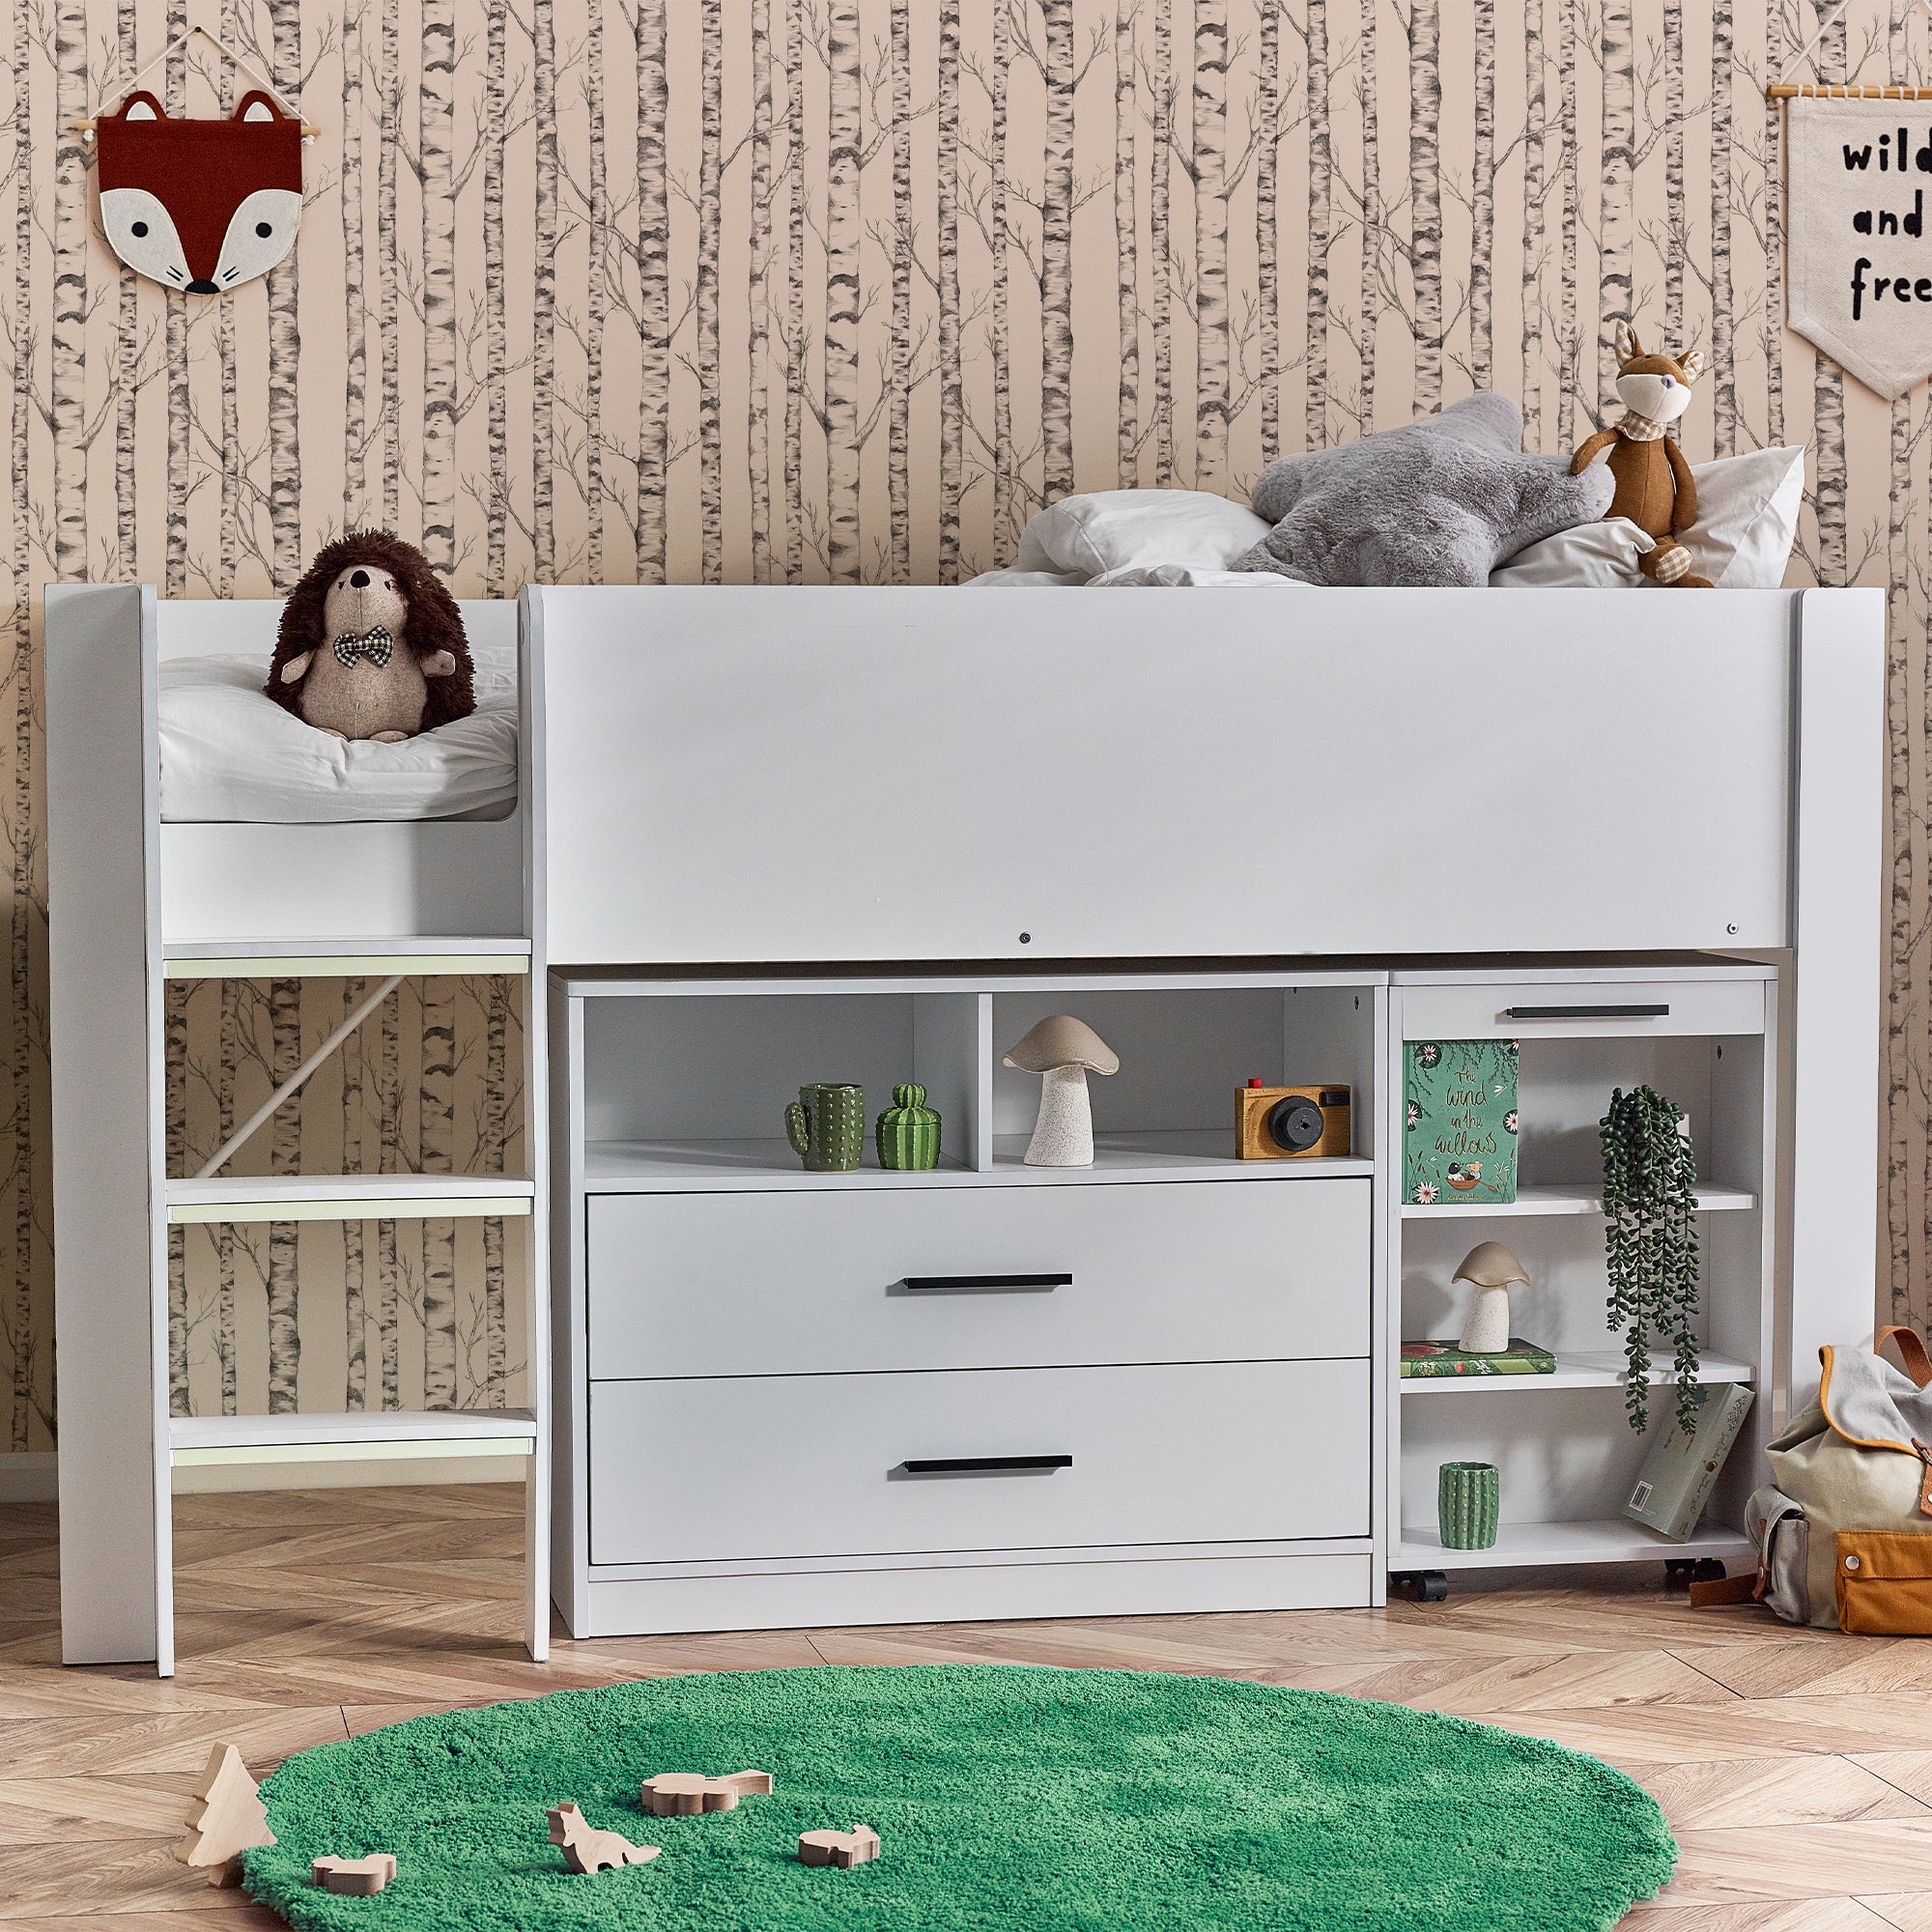 Otis Midsleeper Childrens Bed With Pull Out Desk White